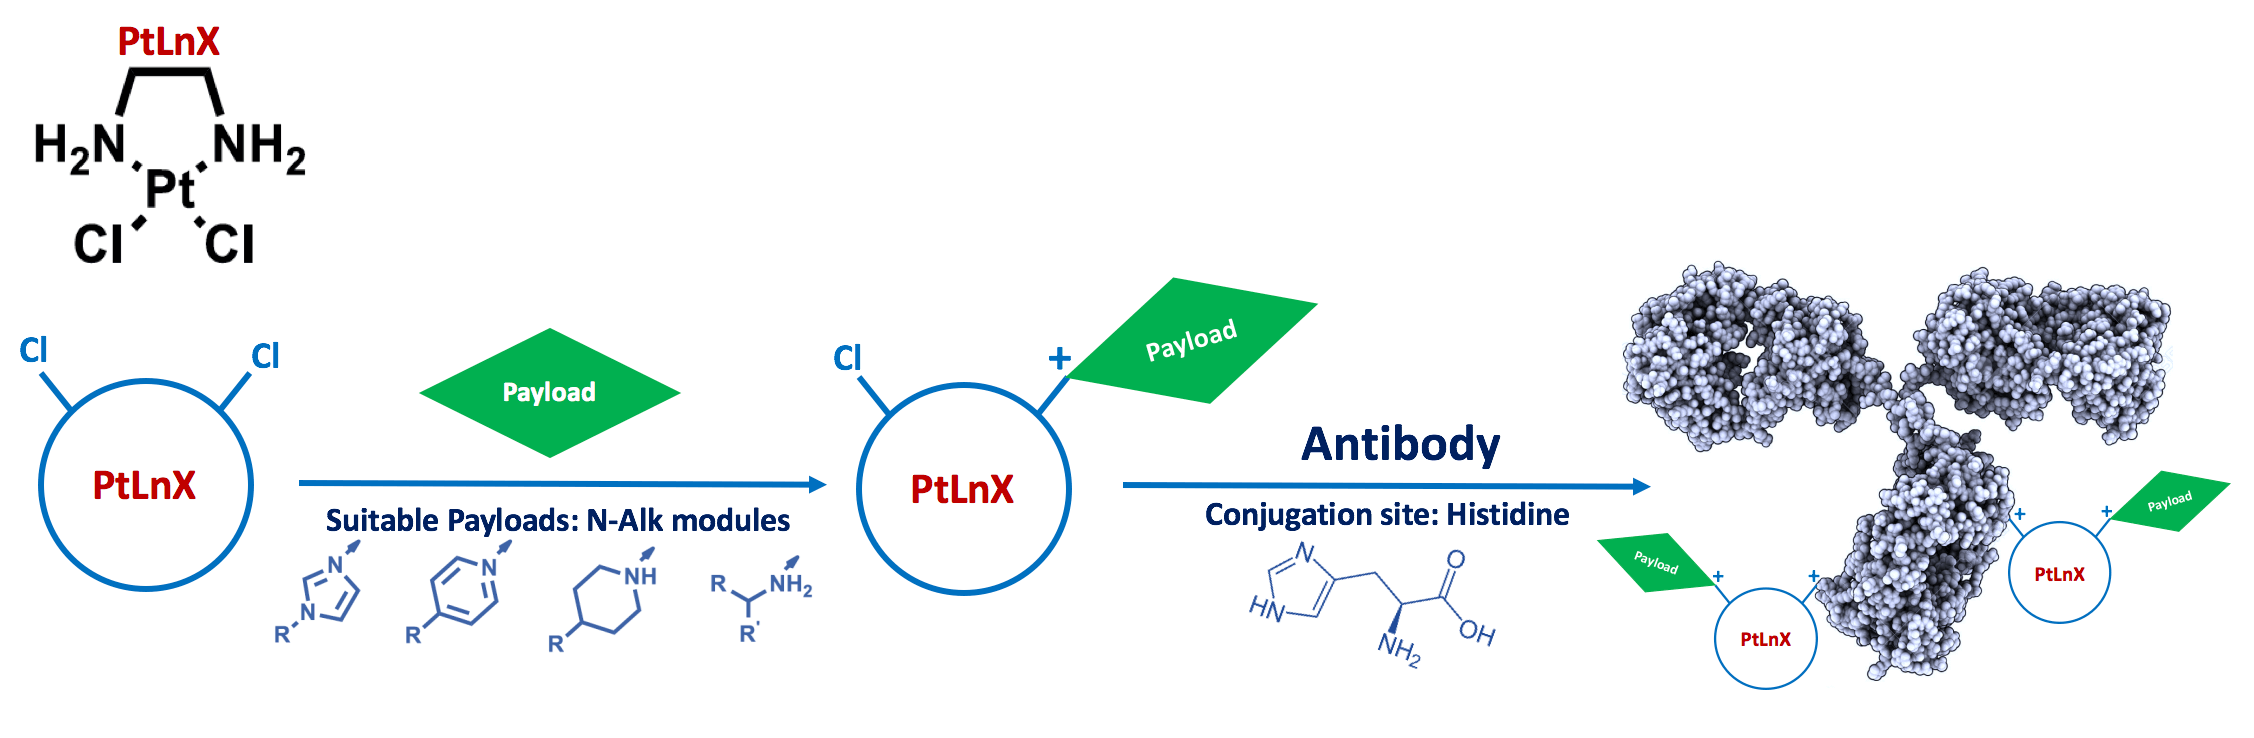  Working scheme of PtLnX linker. PtLnX linker is usually conjugated with payloads to form PtLnX-payload complexes, which are subsequently conjugated to antibodies to form PtLnX ADCs.